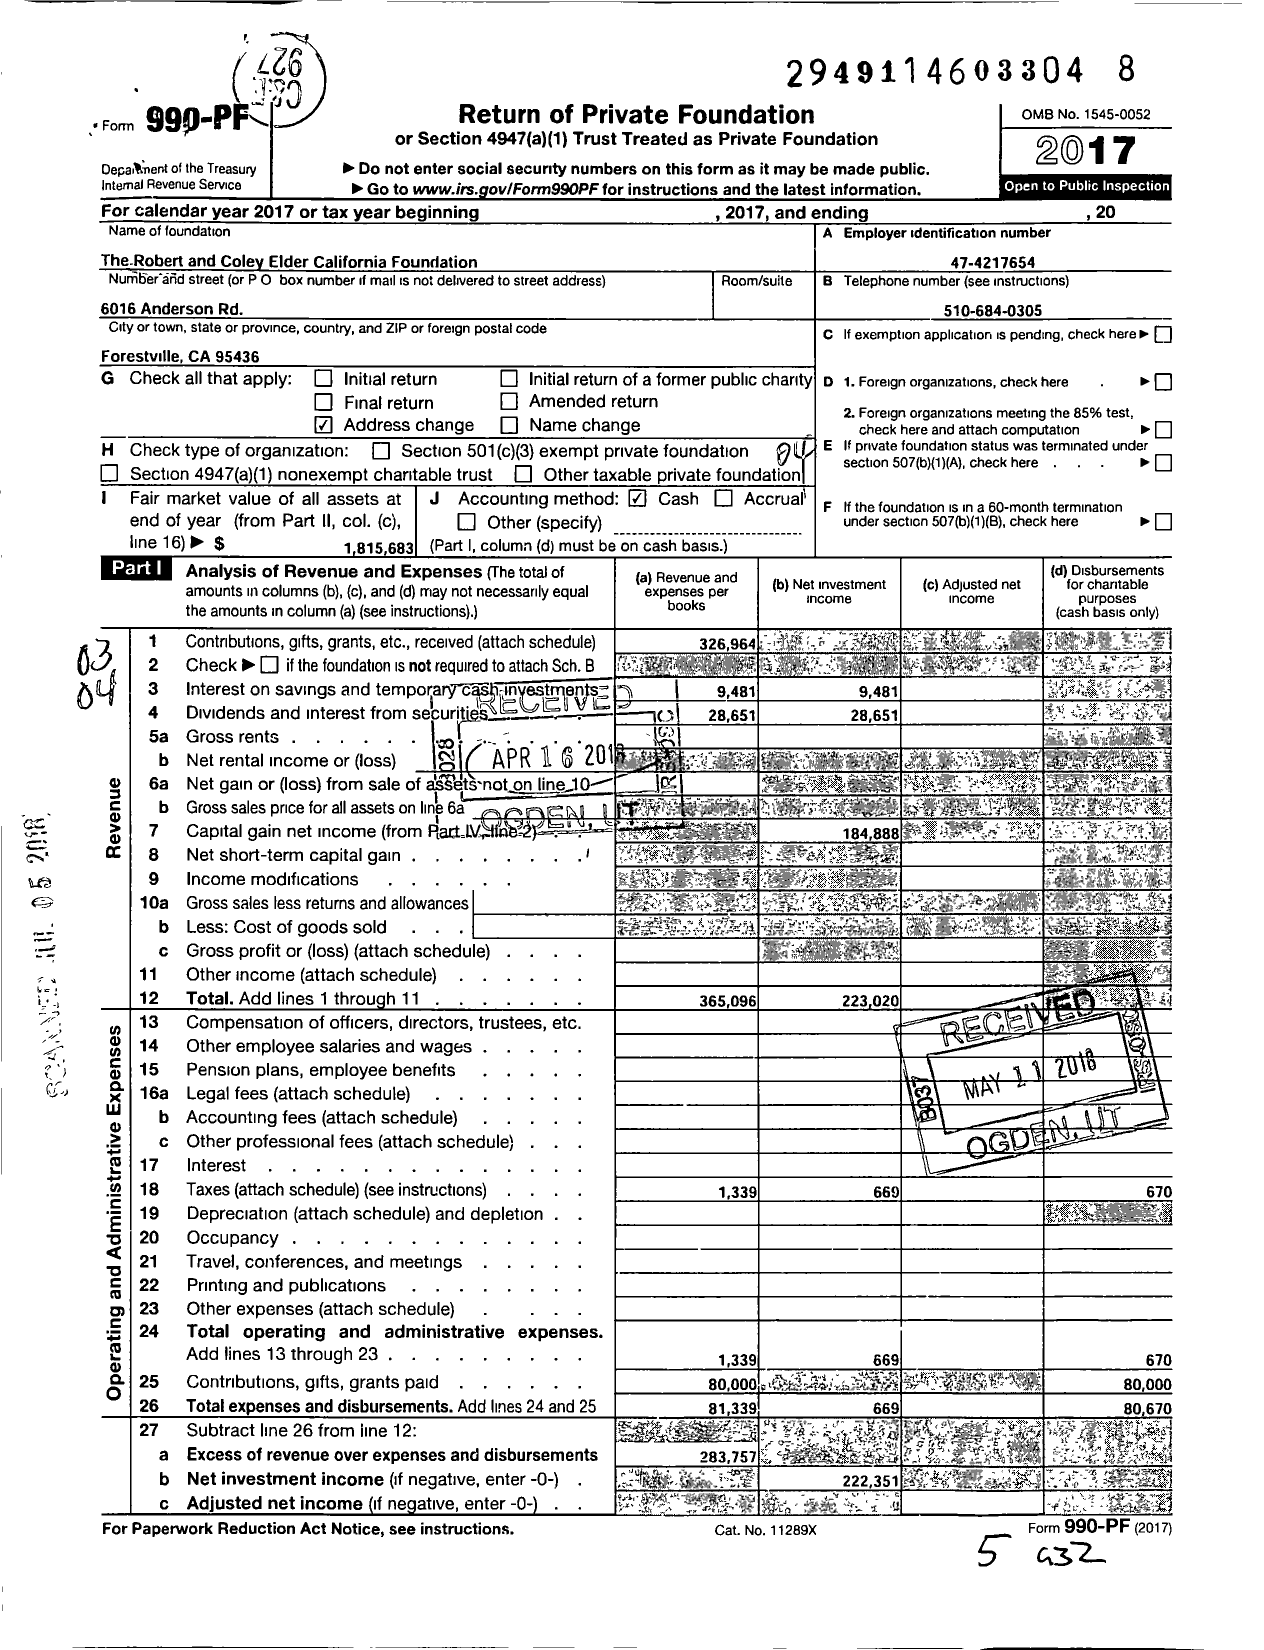 Image of first page of 2017 Form 990PF for Robert and Coley Elder California Foundation